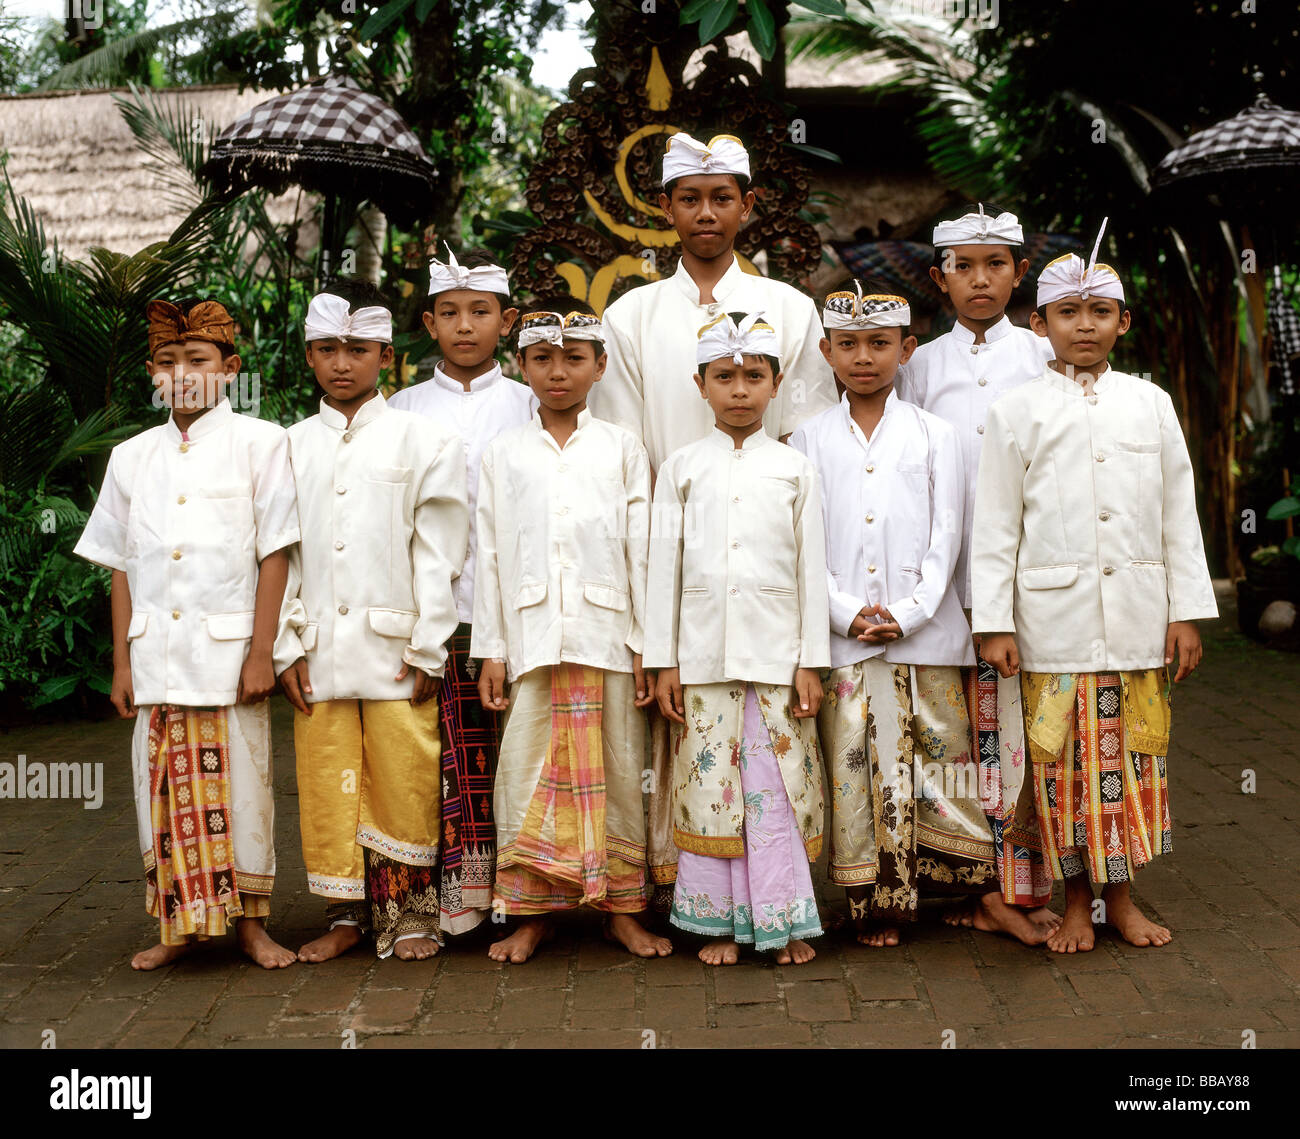 Indonesia, Bali, young boys in traditional costume Stock Photo  Alamy